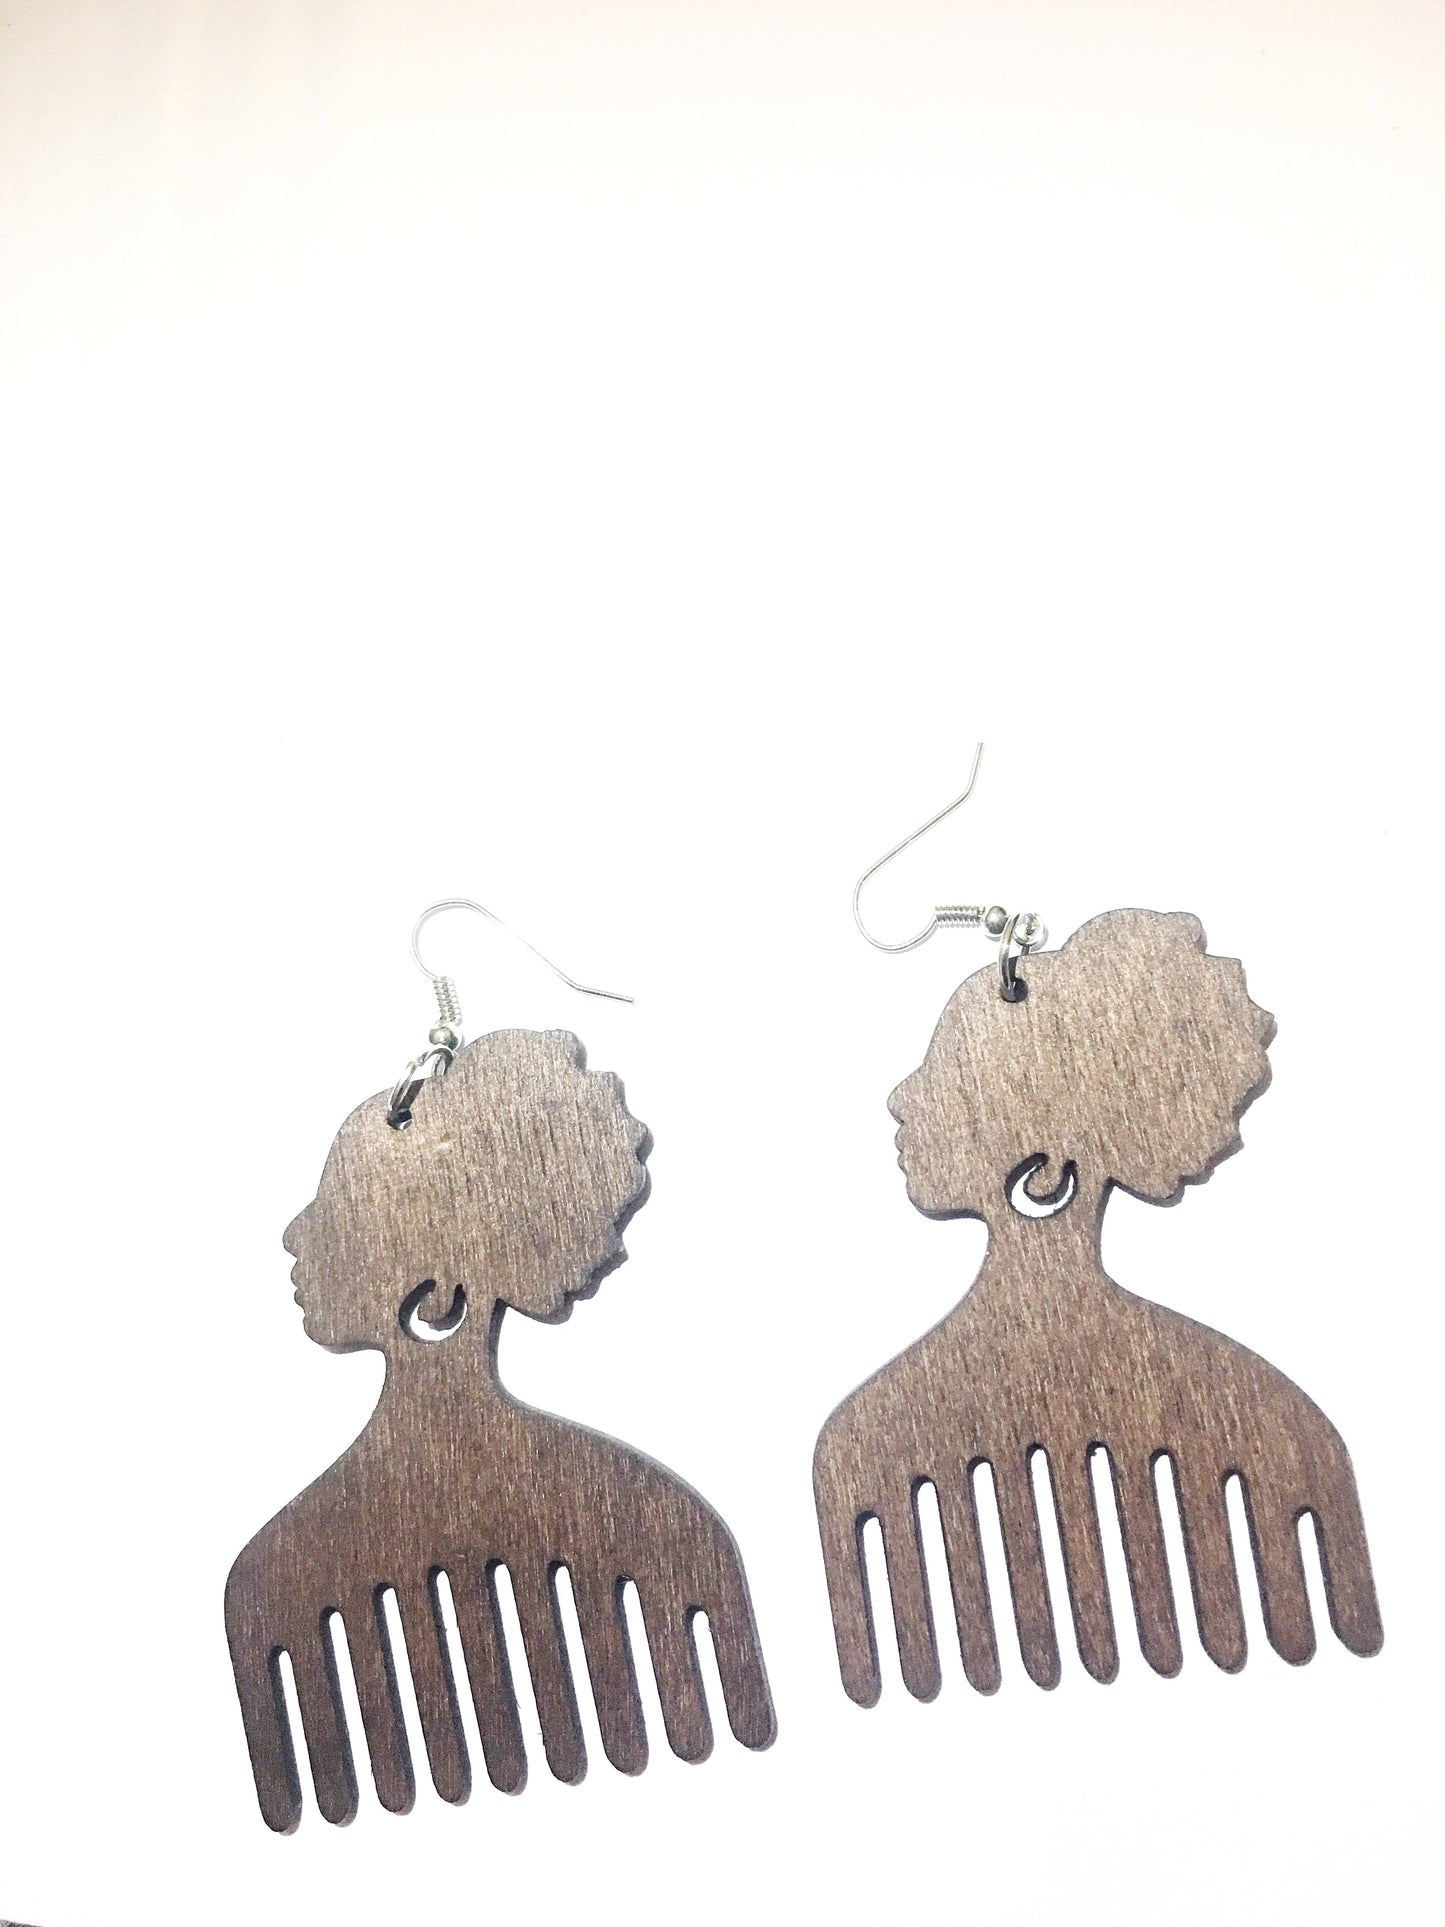 Afro Head - Afro Comb Wooden Earrings